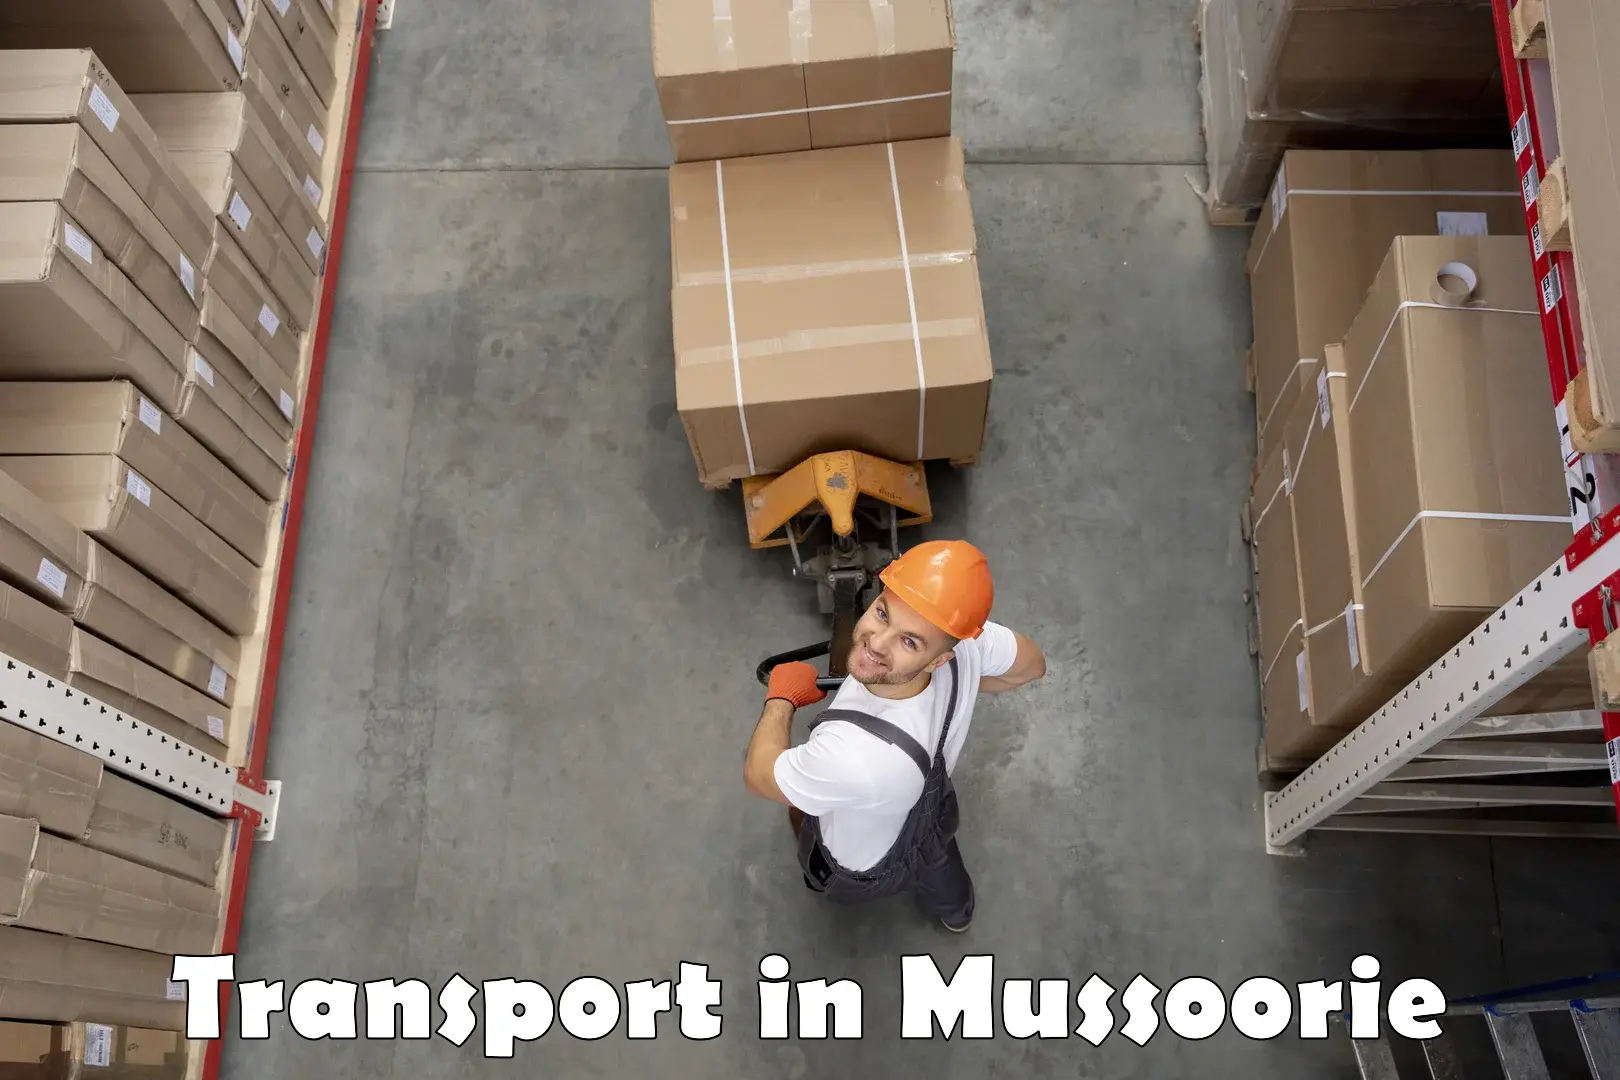 Cargo train transport services in Mussoorie